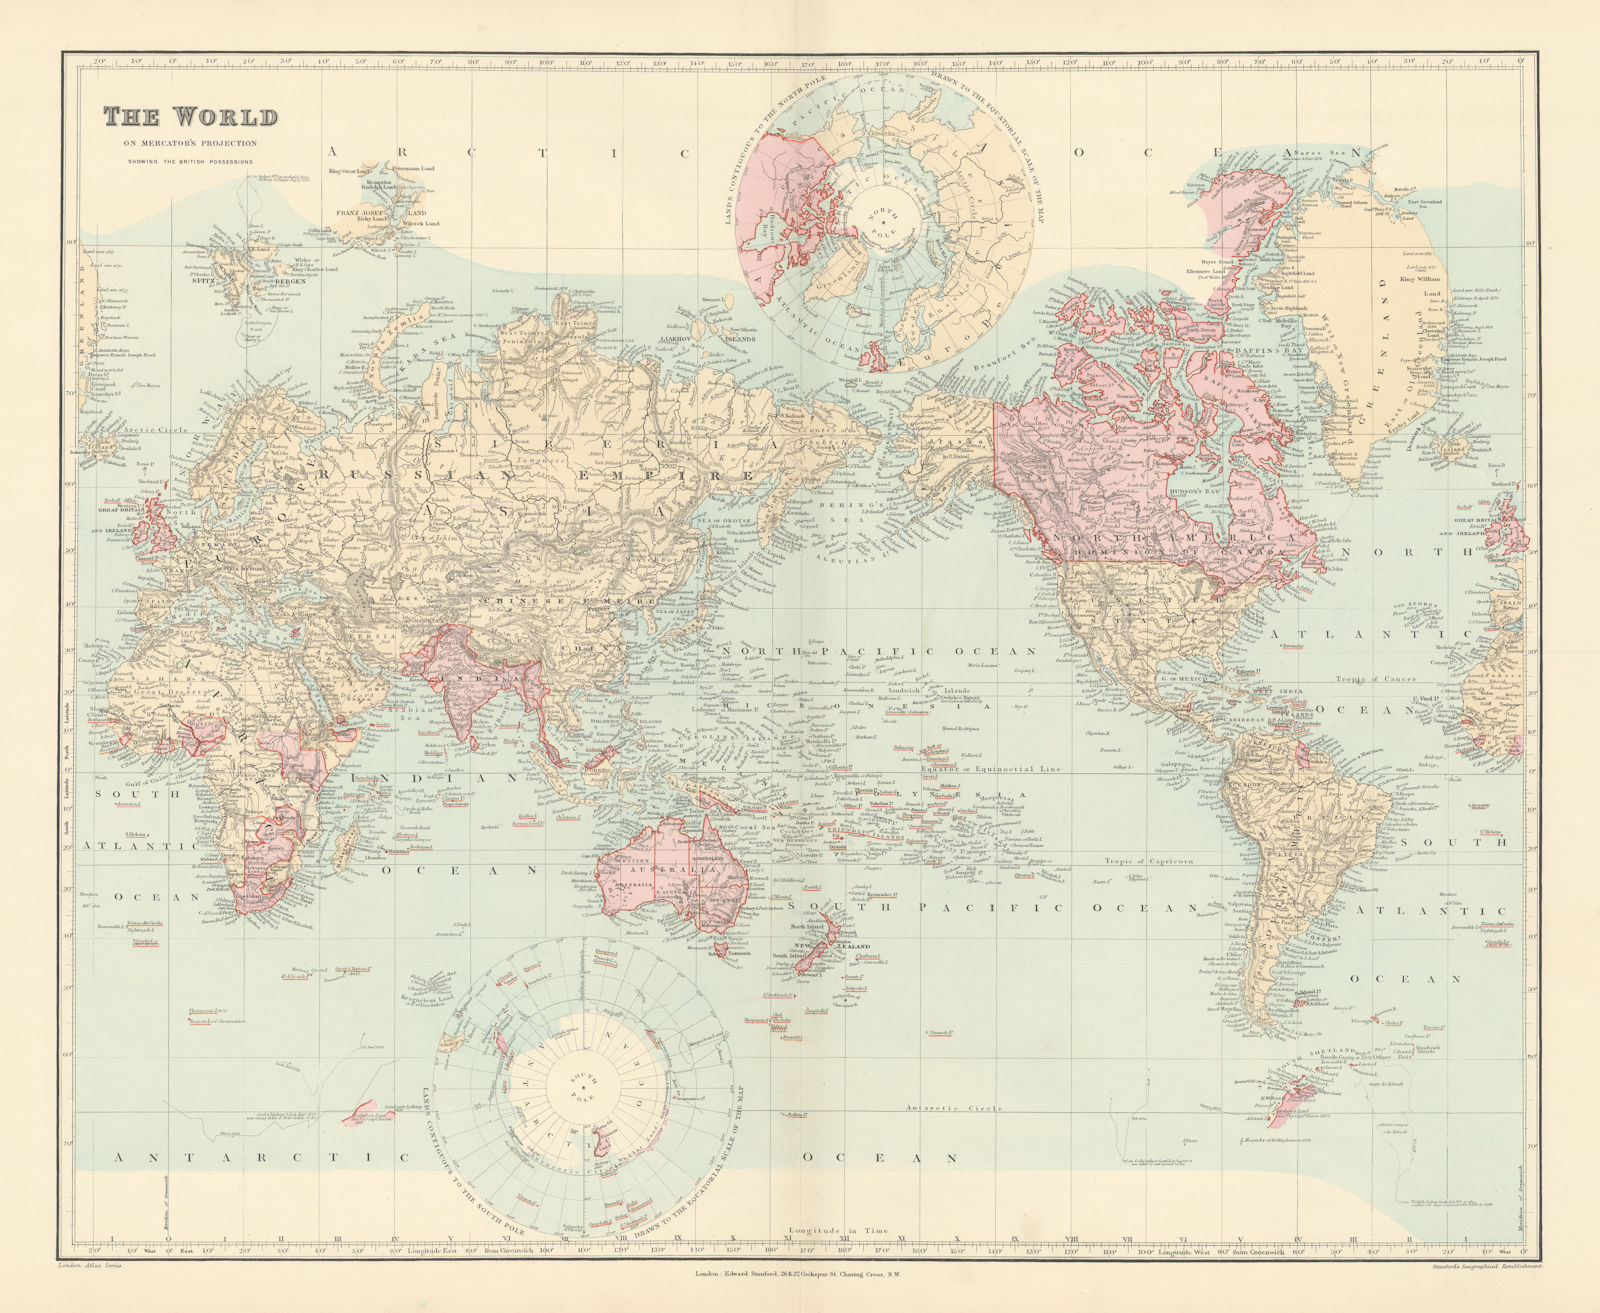 The World showing British Possessions/Empire in pink. 52x63cm. STANFORD 1896 map